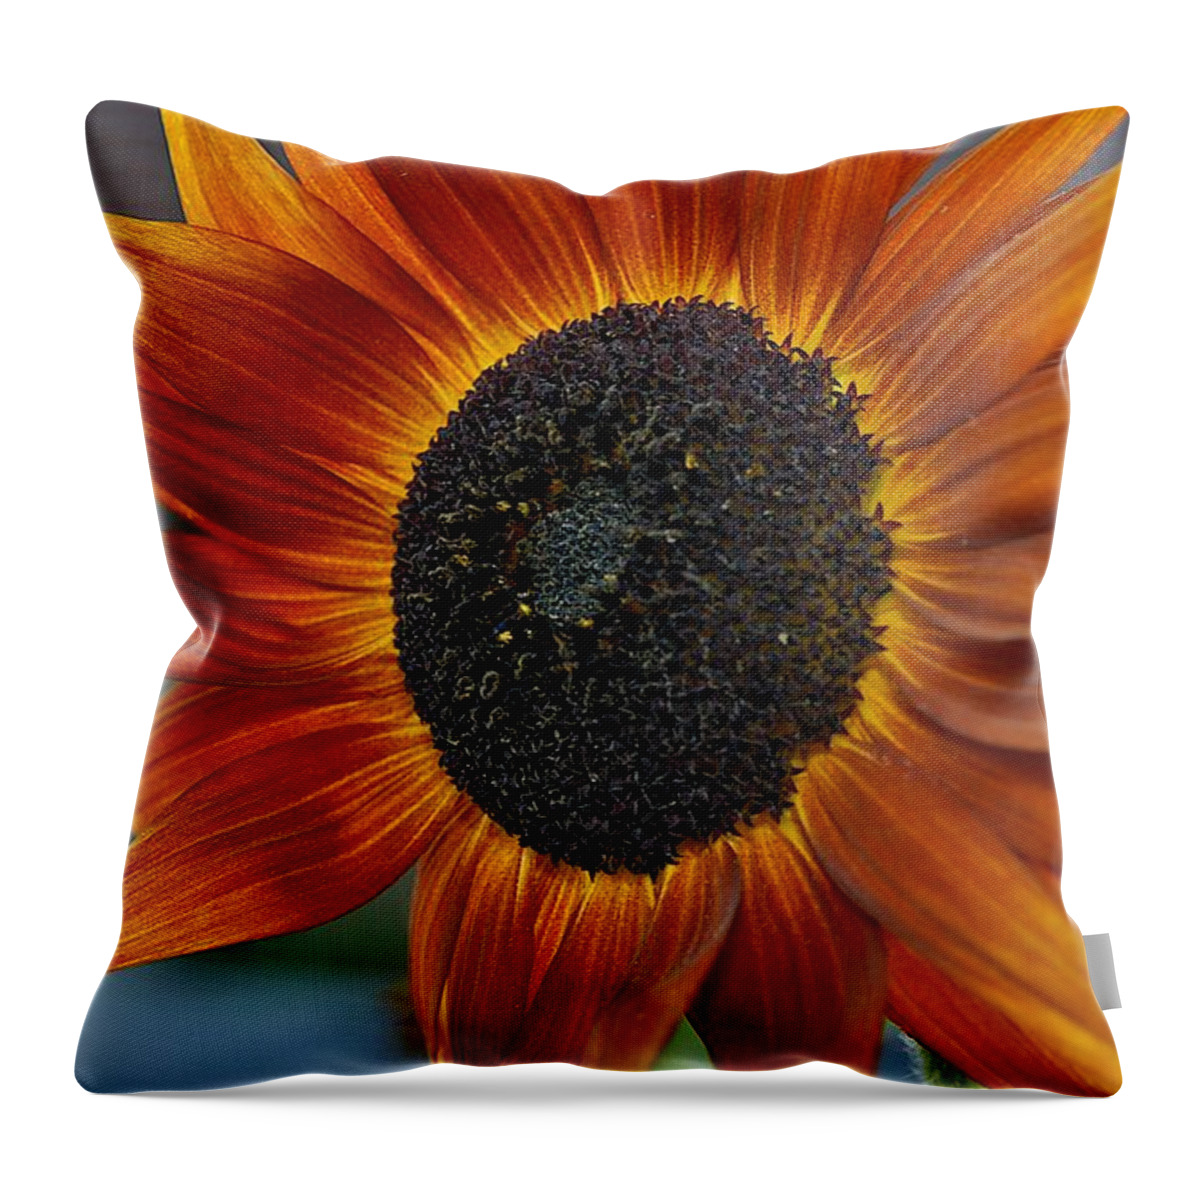 Orange Sunflower Throw Pillow featuring the photograph Isabella Sun by Joseph Yarbrough